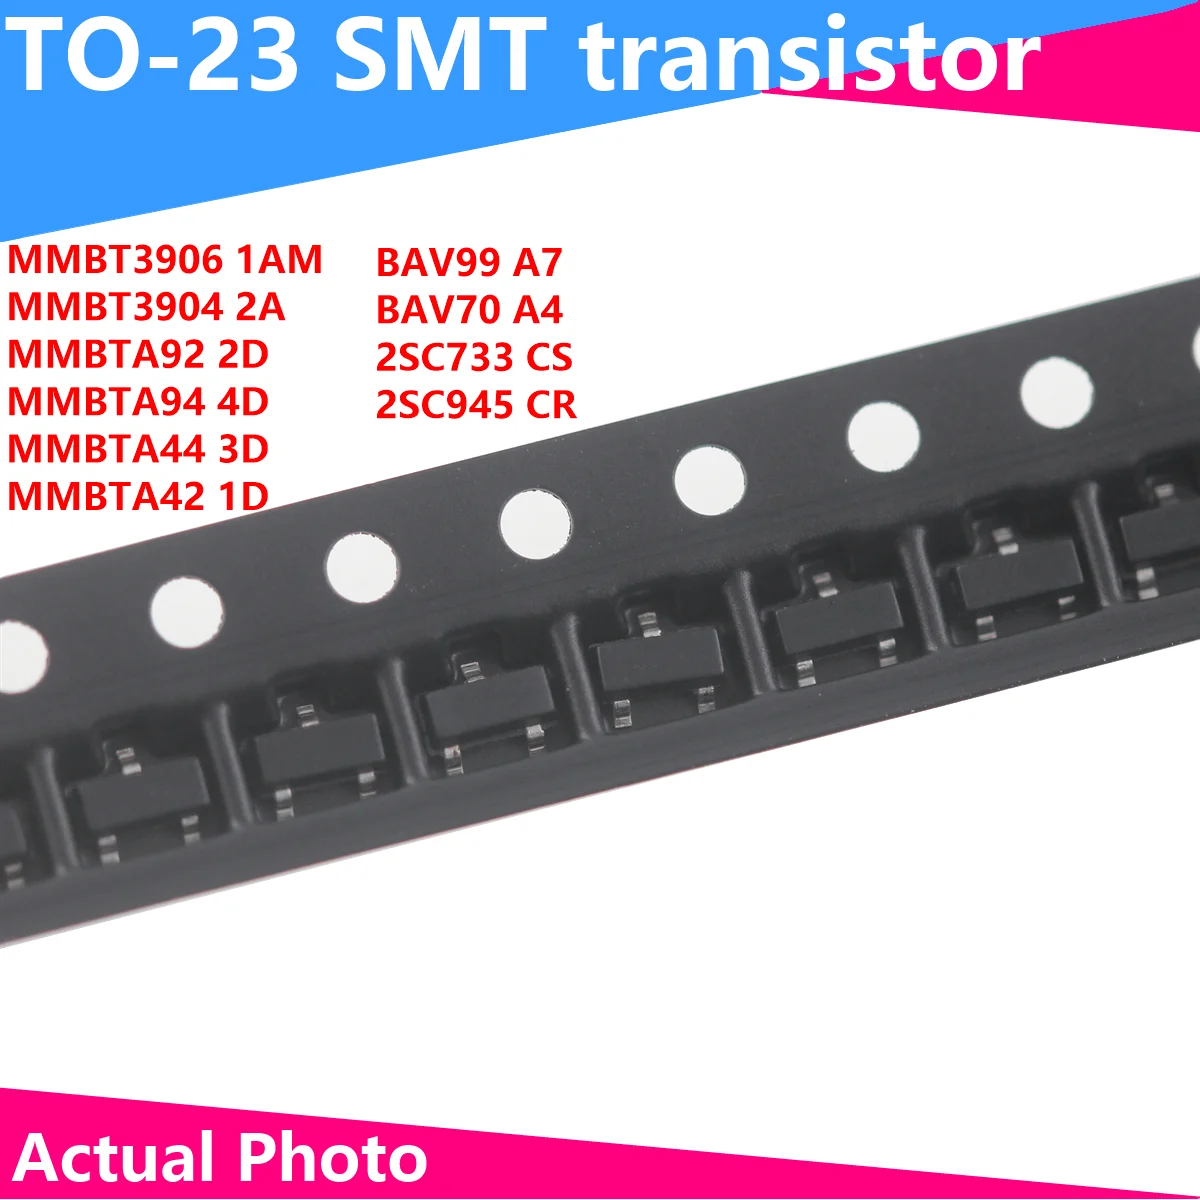 100/50PCS transistor smd sot23 MMBT3906 1AM MMBT3904 2A MMBT3904 MMBTA92 MMBTA44 MMBTA42 BAV99 BAV70 2SC733 2SC945 3000pcs bav99lt1g bav99 a7 a7w sot23 100% new electronic audio transistor mosfet